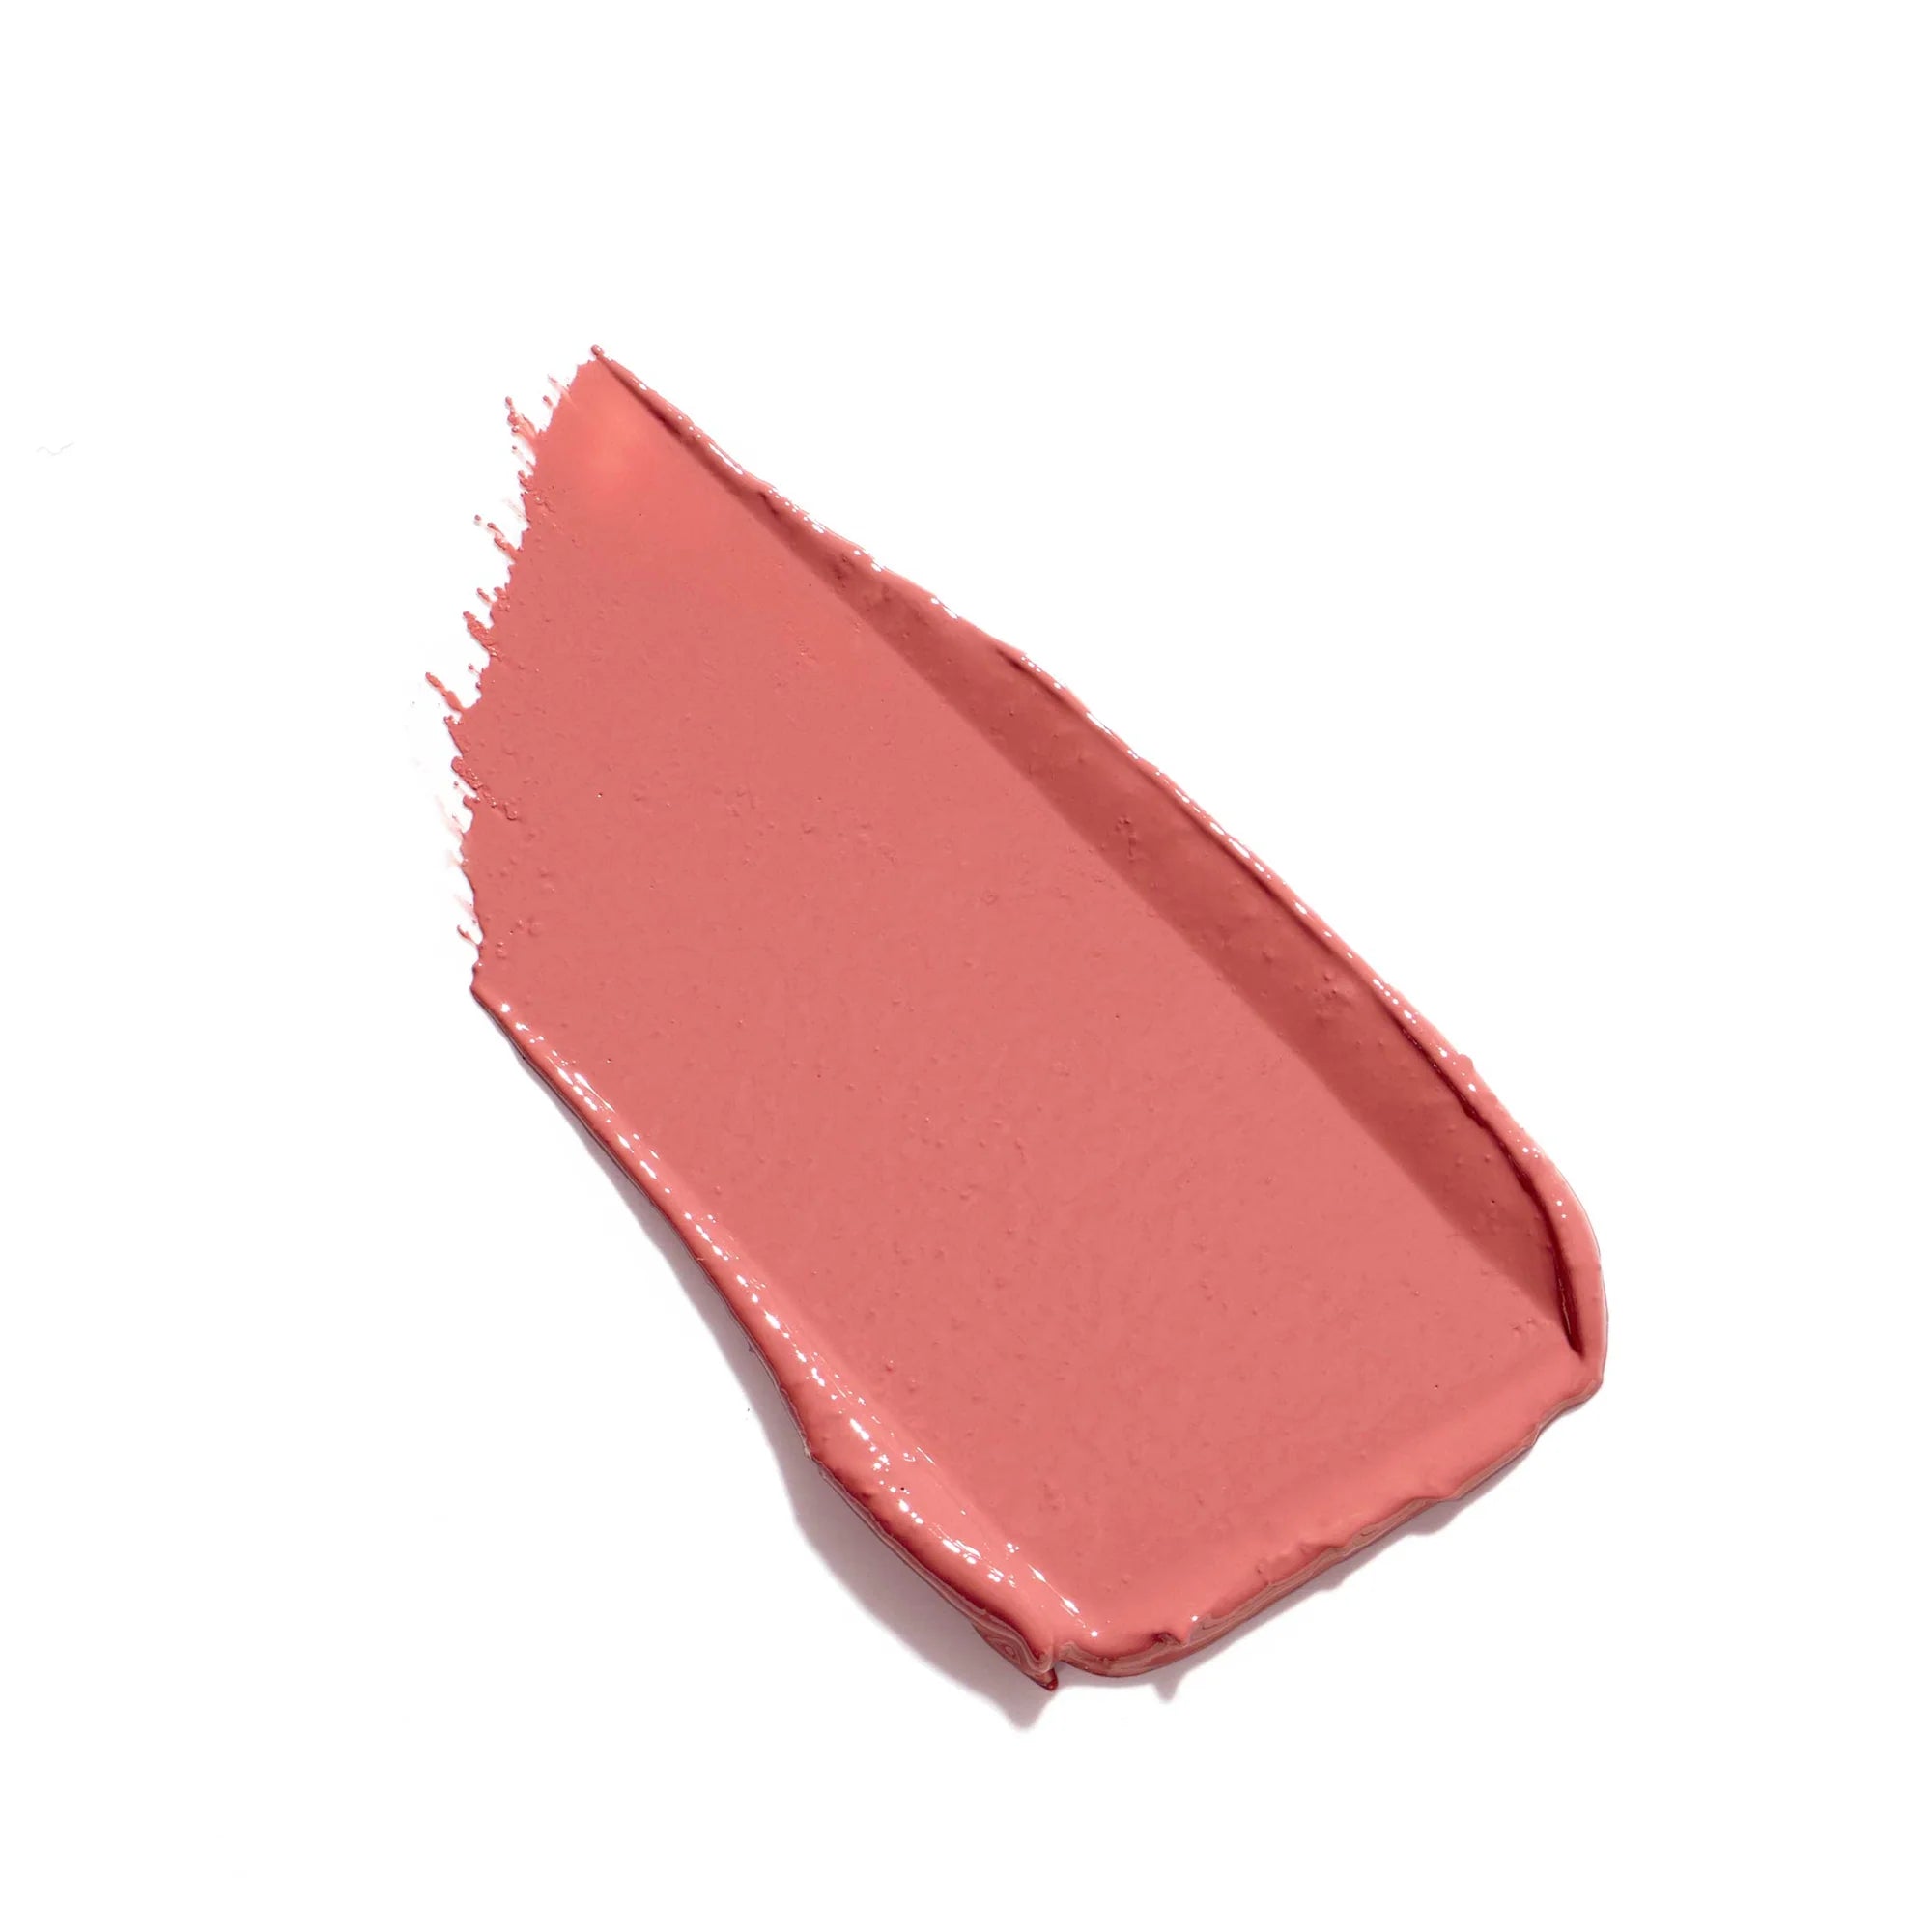 Jane Iredale's ColorLuxe Hydrating Cream Lipstick - swatch and color Blush - warm light pink